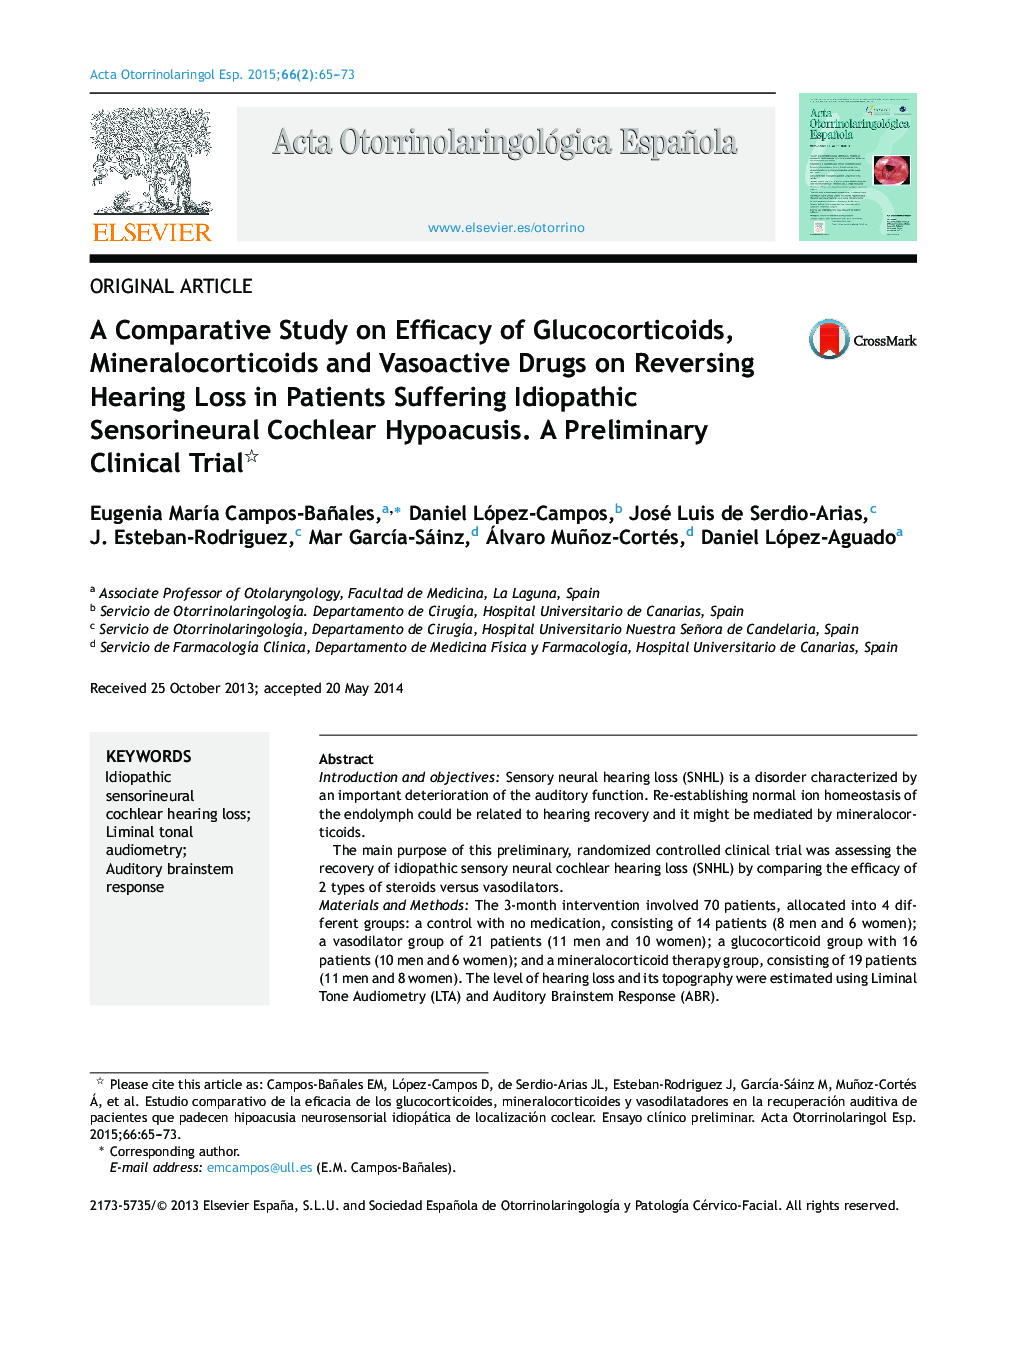 A Comparative Study on Efficacy of Glucocorticoids, Mineralocorticoids and Vasoactive Drugs on Reversing Hearing Loss in Patients Suffering Idiopathic Sensorineural Cochlear Hypoacusis. A Preliminary Clinical Trial 